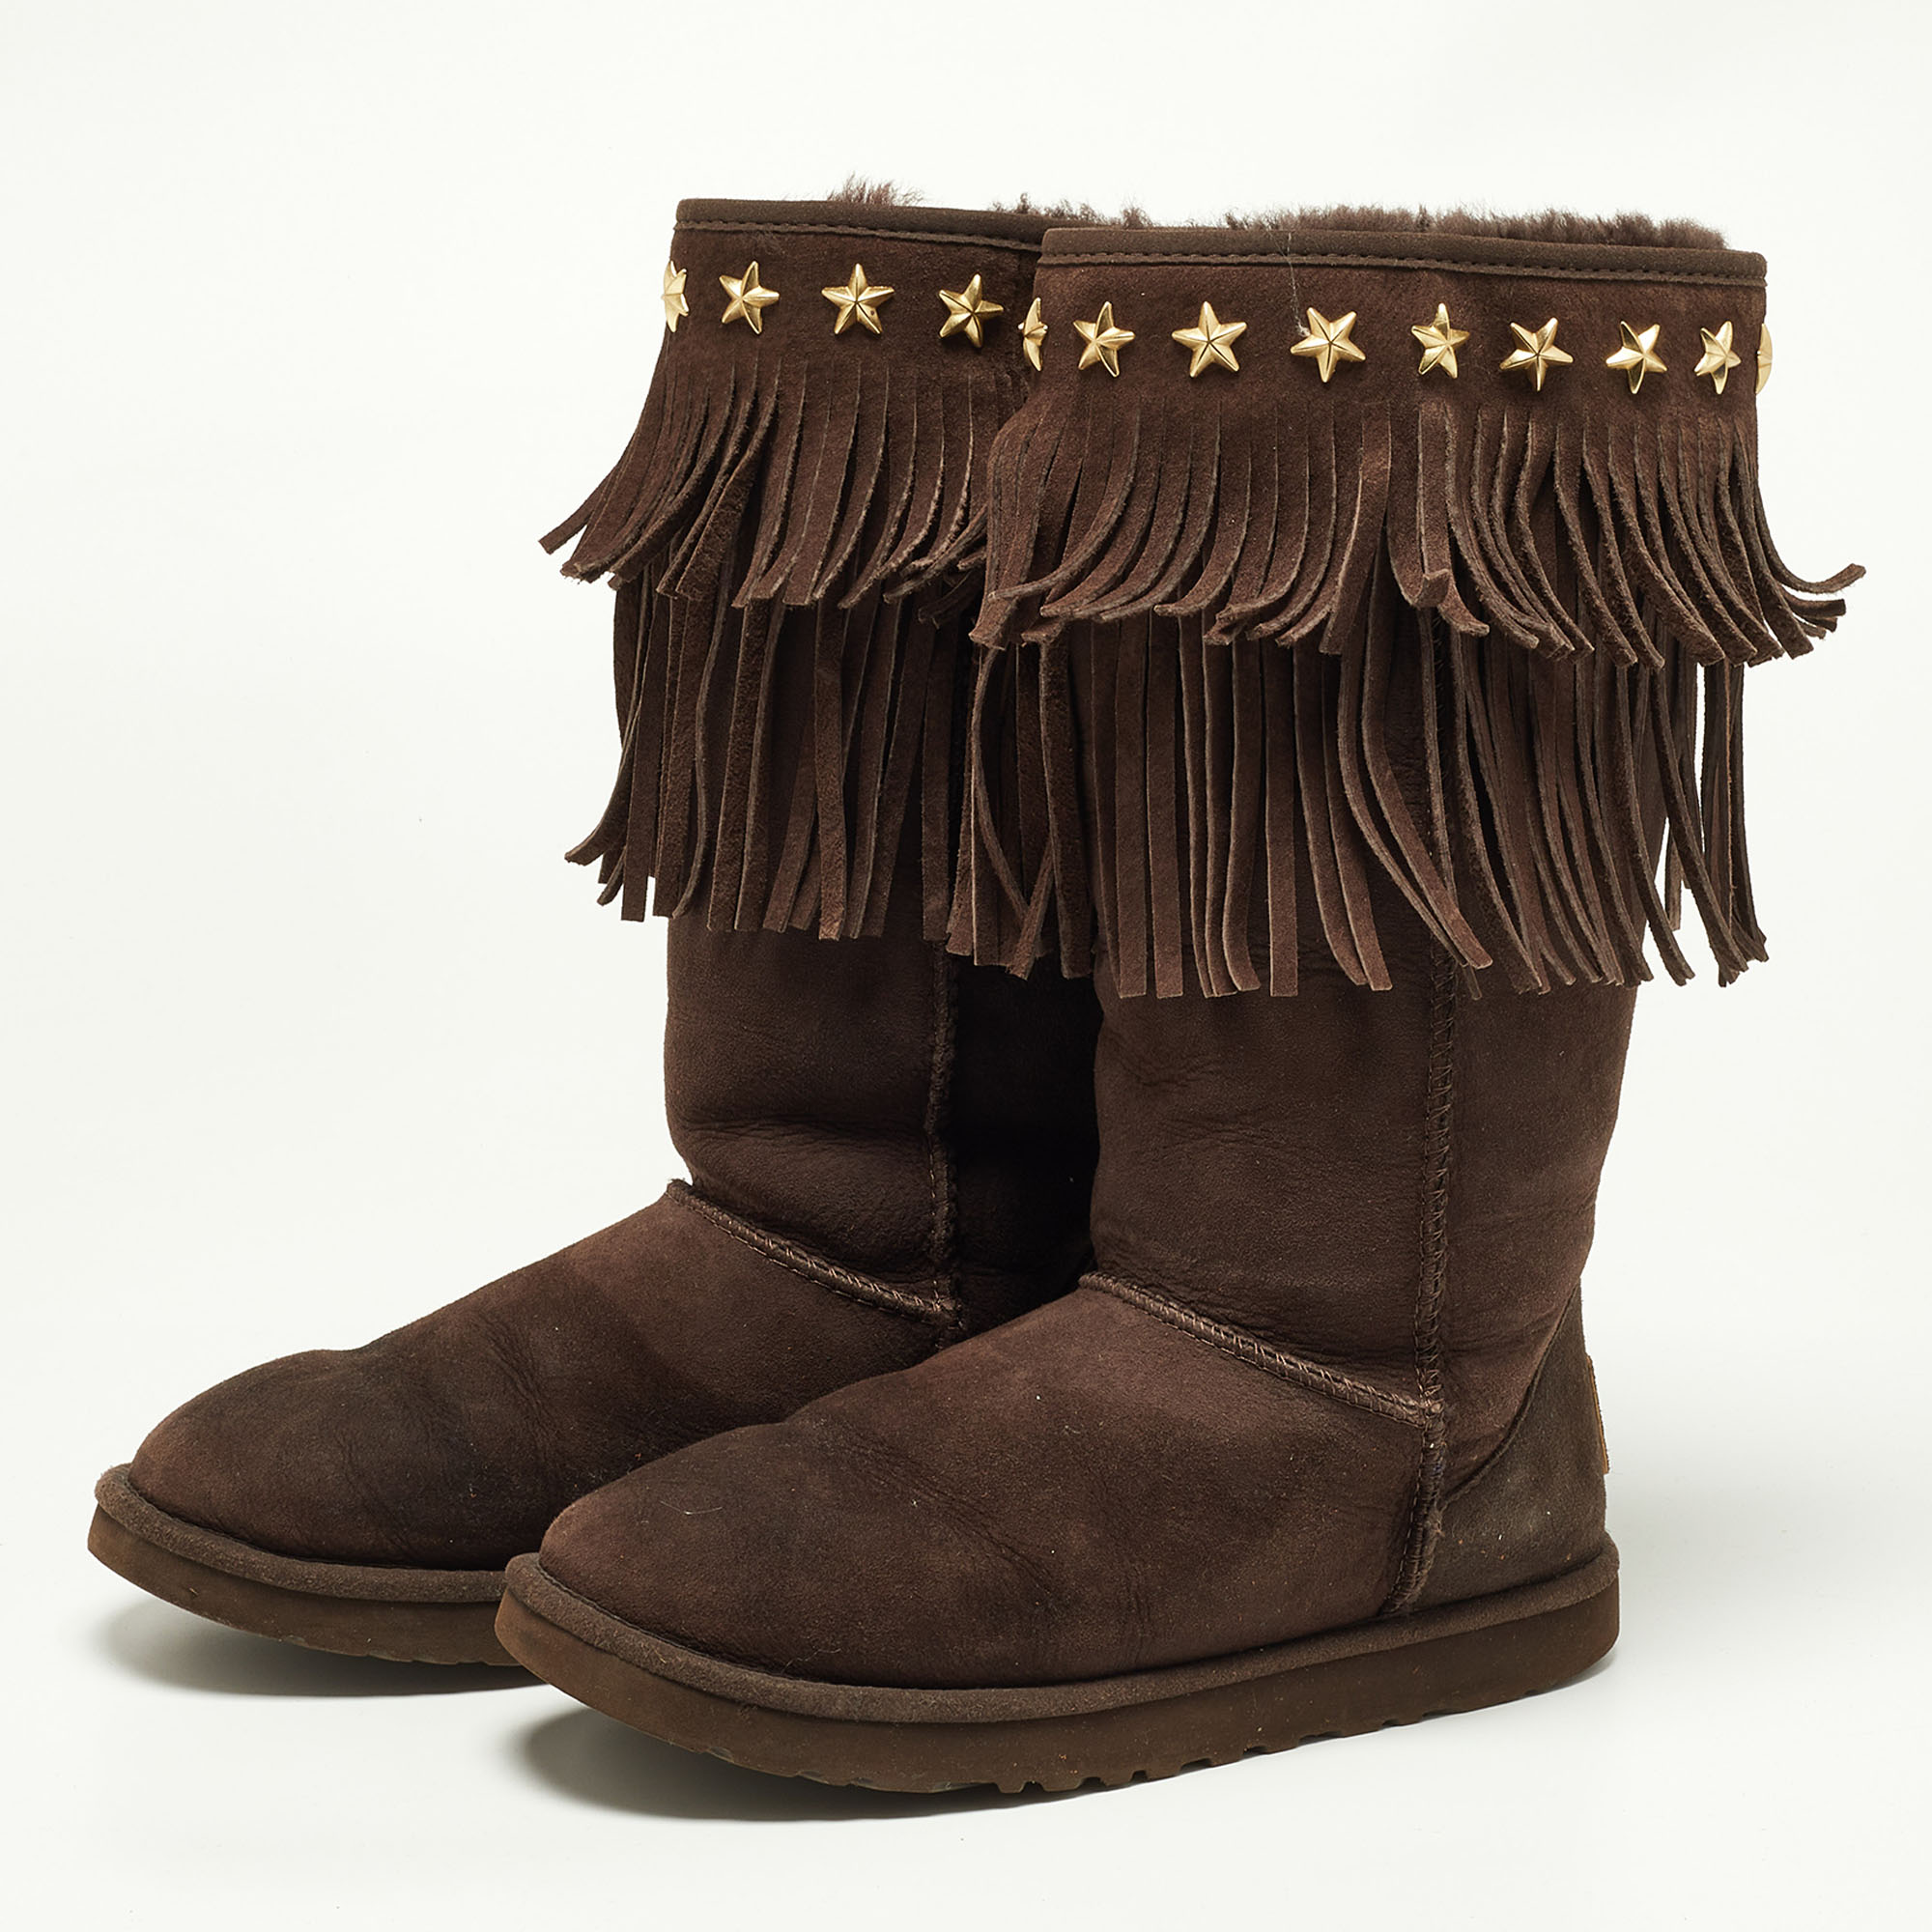 

Jimmy Choo x Uggs Brown Studded Suede Fringe Snow Boots Size